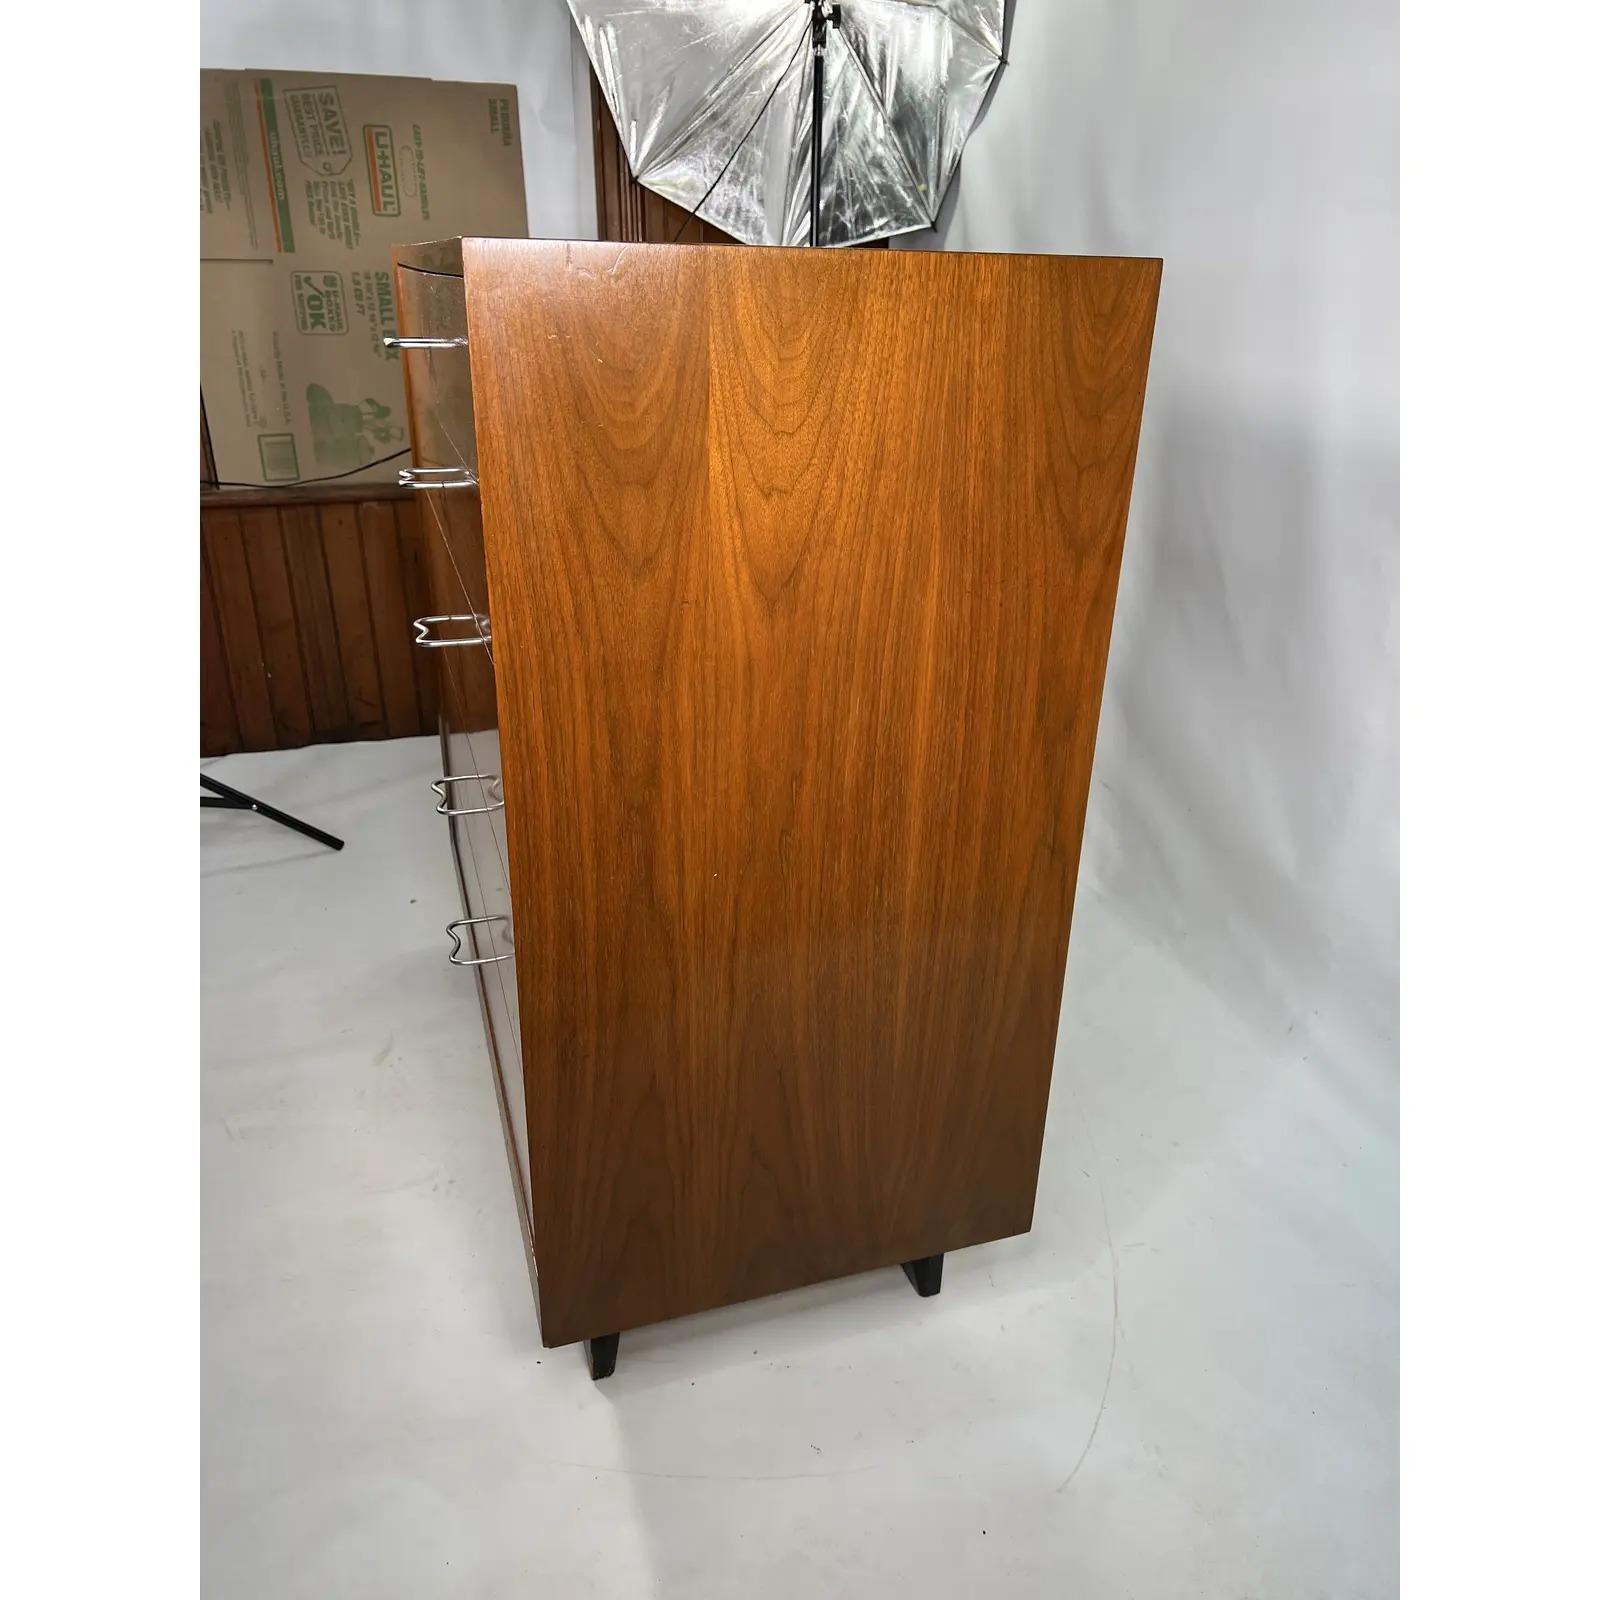 This beautiful George Nelson for Herman Miller Dresser was designed and manufactured in the 1950s. It is made out of walnut and has aluminum pulls.